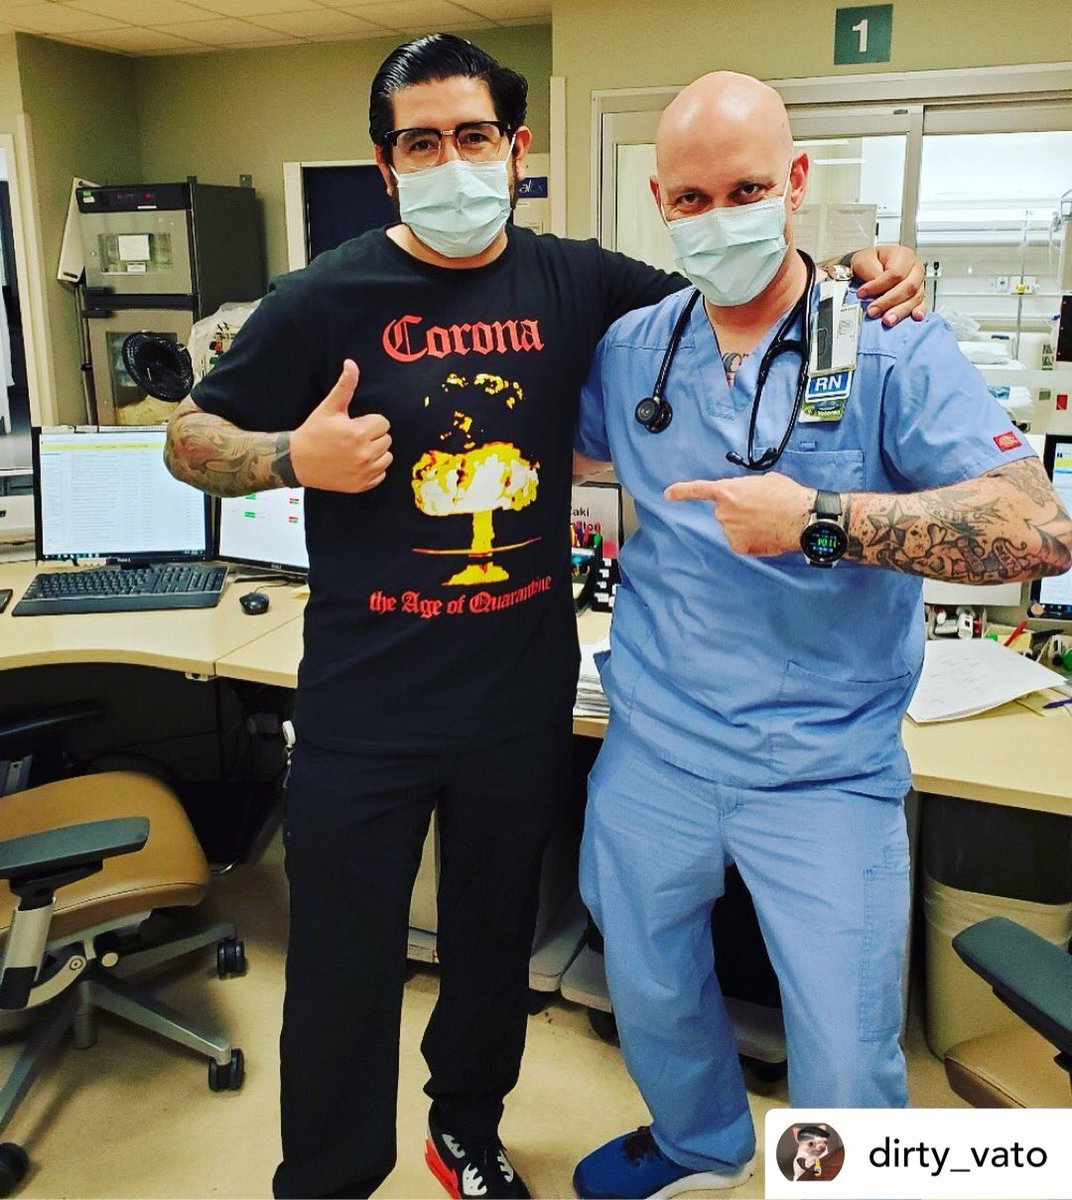 Love it🔥🔥🔥
*

Posted @withregram • @dirty_vato Just another day at the ER with my coworker Justin a Cro-Mags fan. We gotta know! #nyhc #ageofquarantine